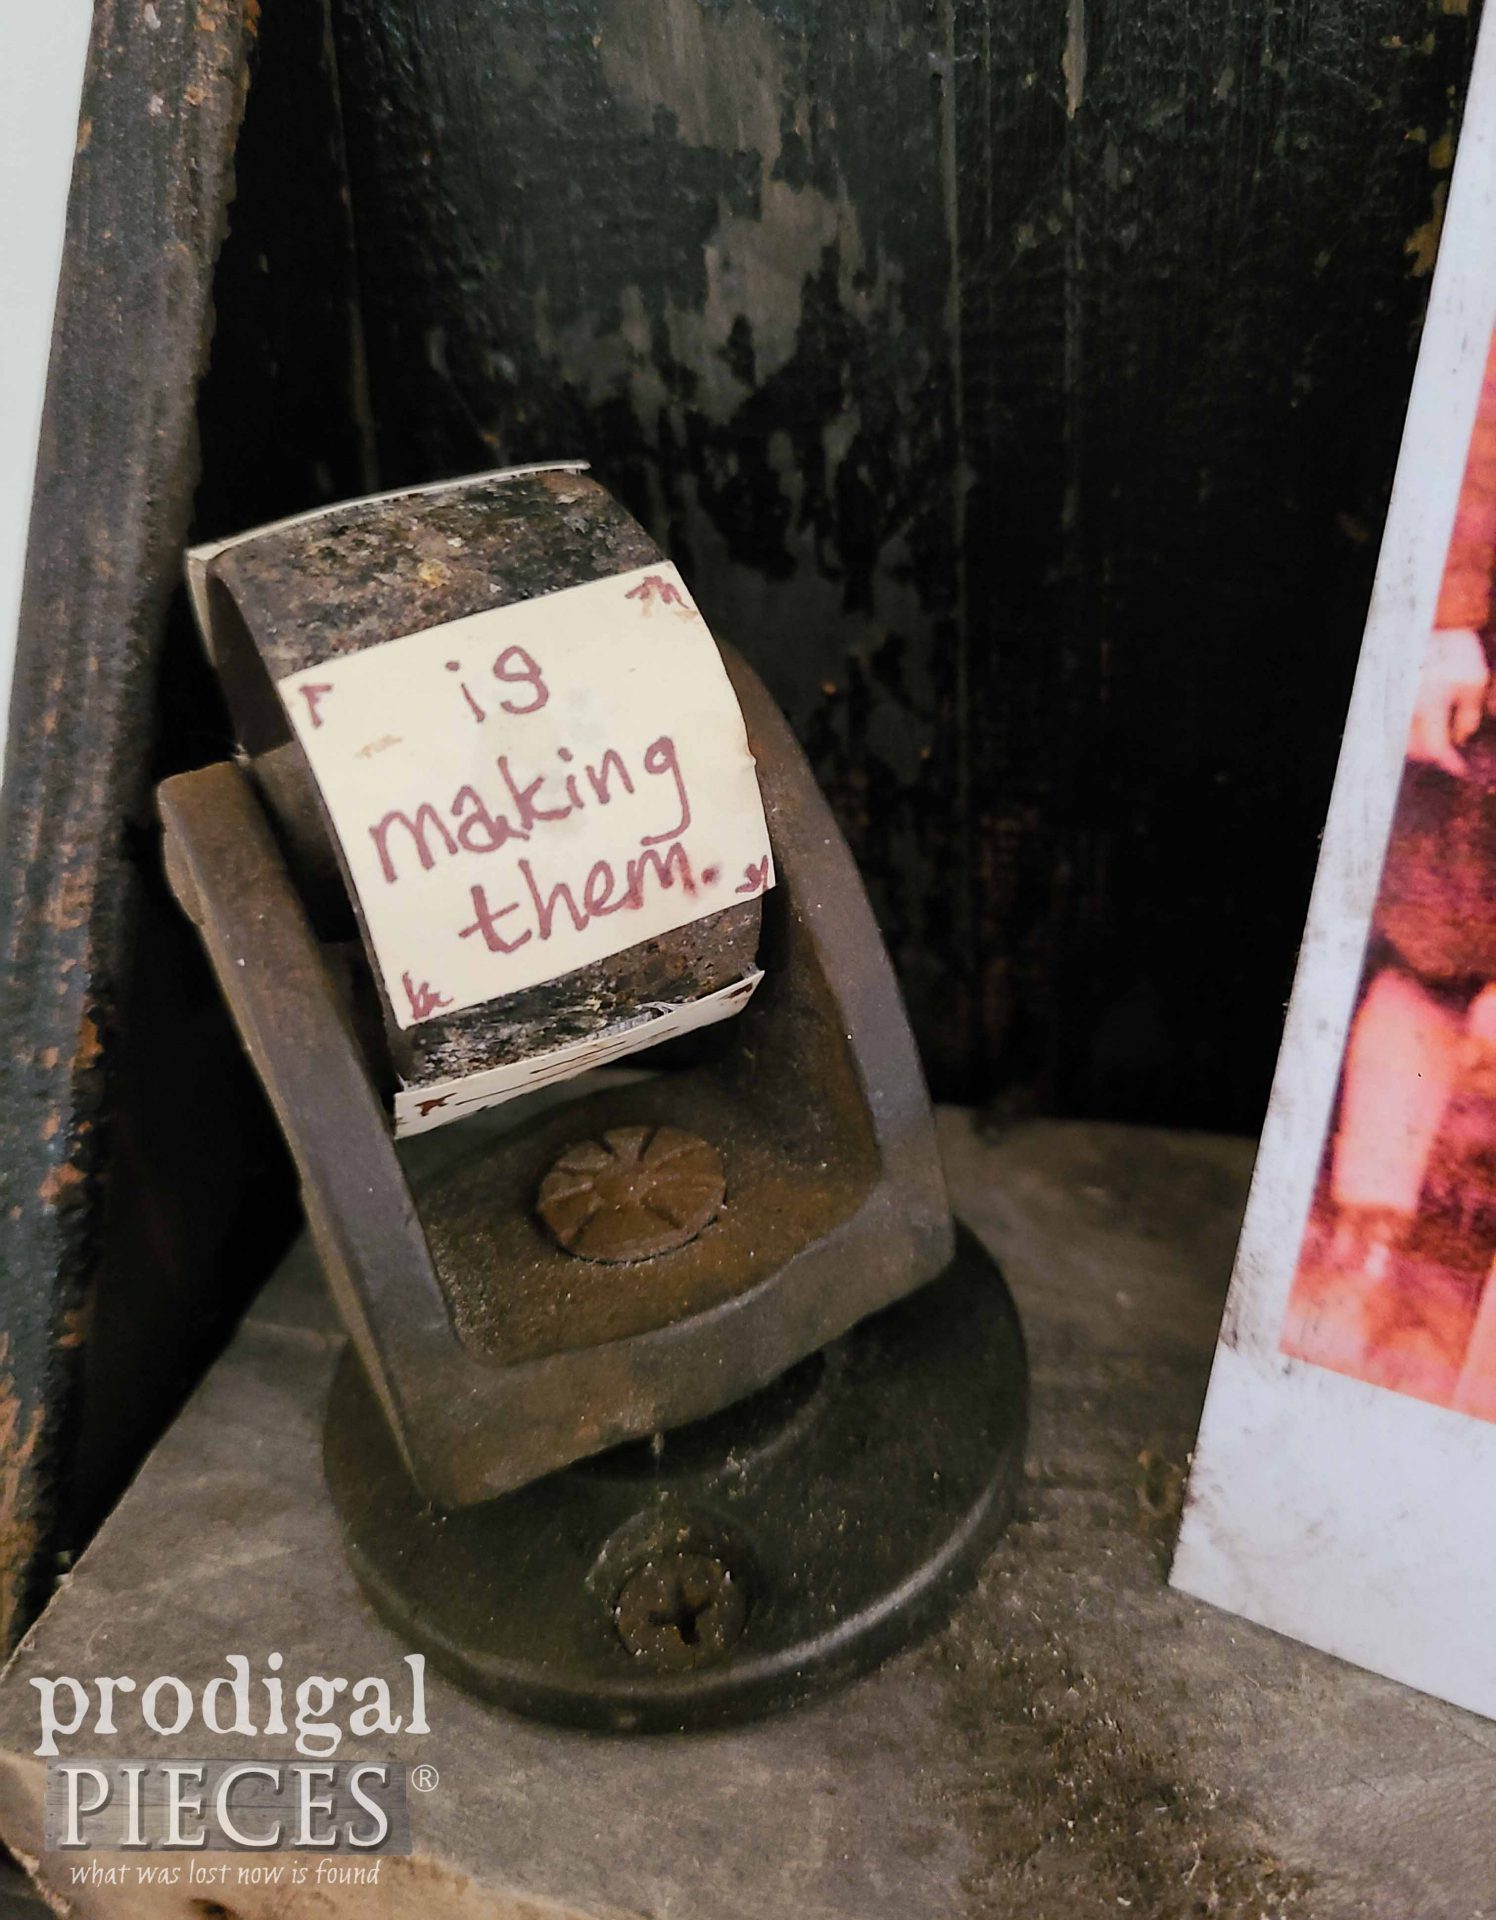 Making Memories Quote for Rustic Chic Home Decor | prodigalpieces.com #prodigalpieces #rustic #farmhouse #eclectic